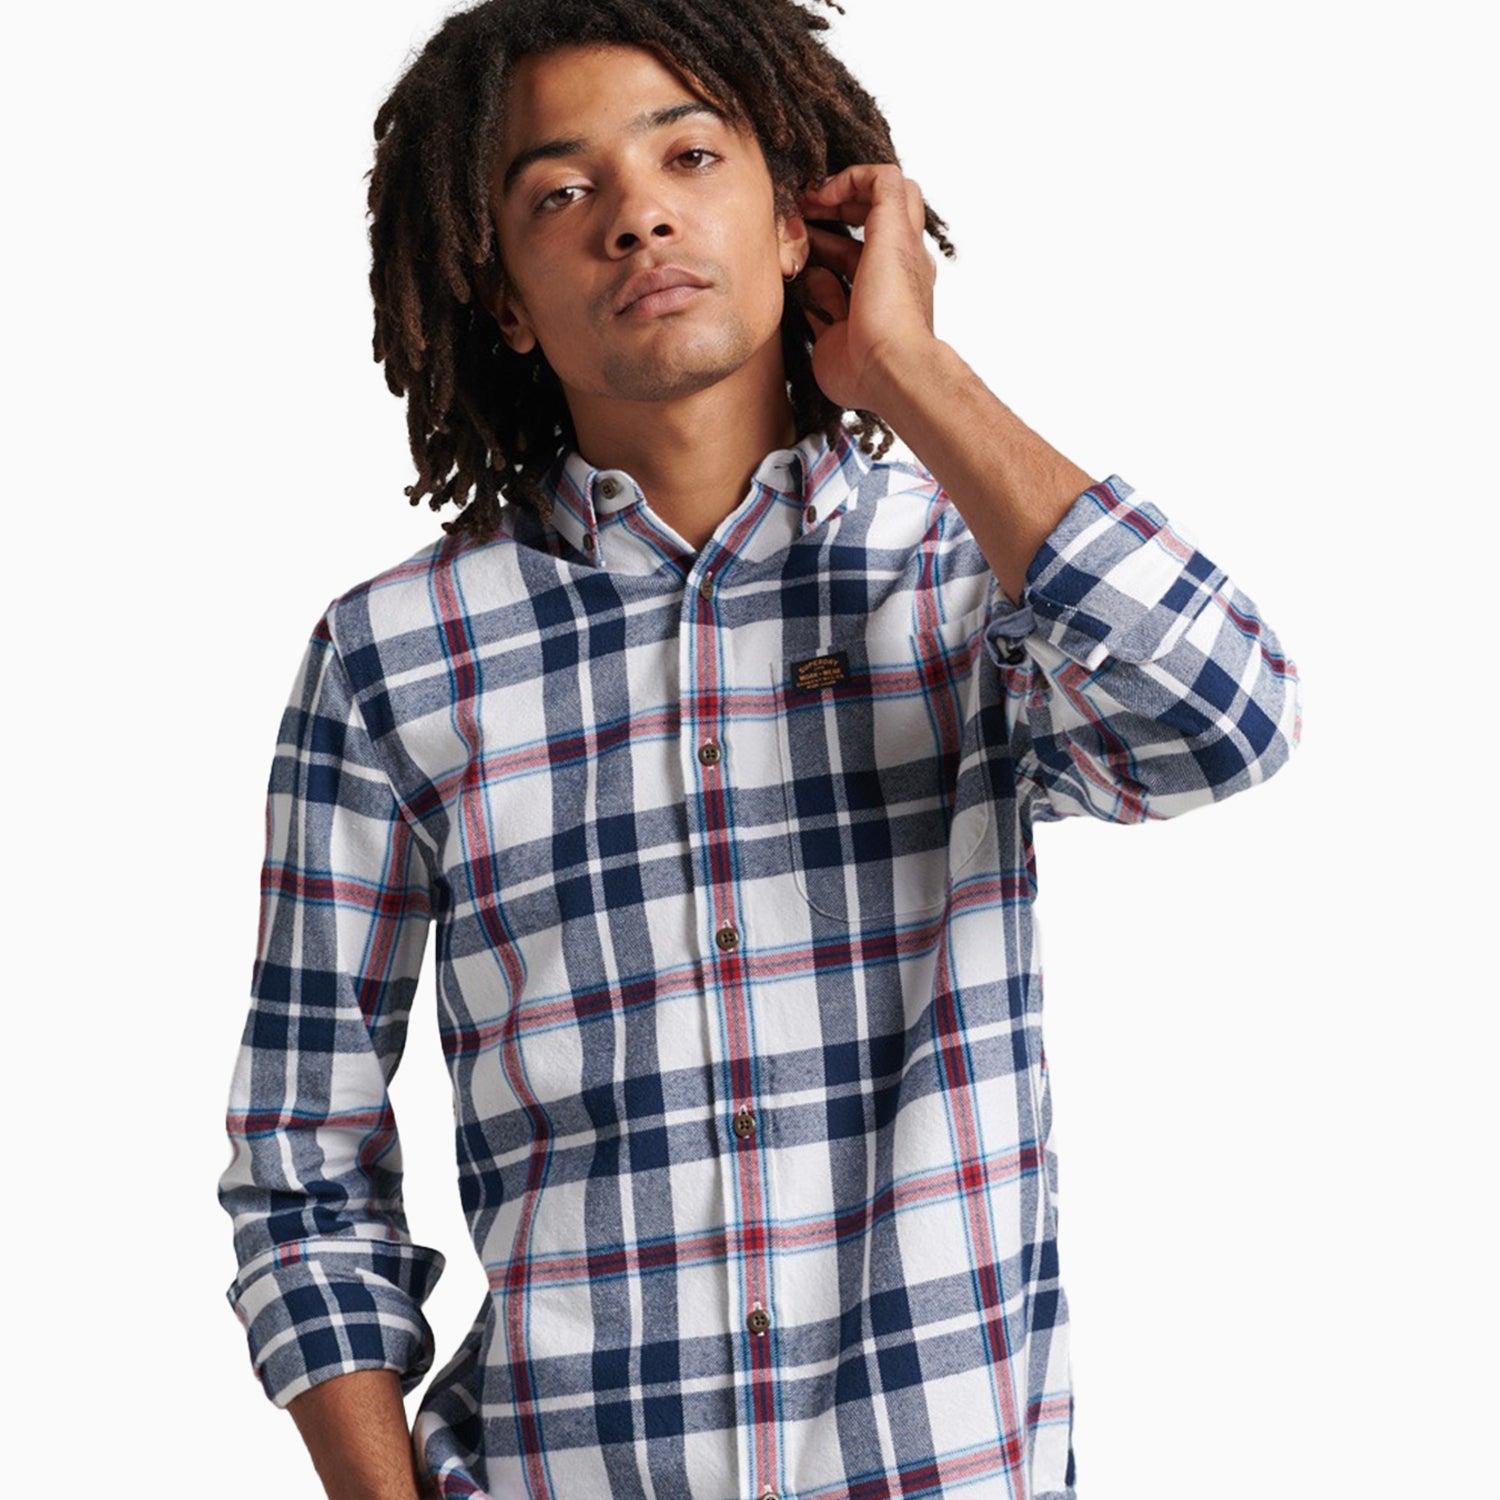 Superdry Men's Organic Cotton Vintage Lumberjack Shirt - Color: Flint Check White - Tops and Bottoms USA -